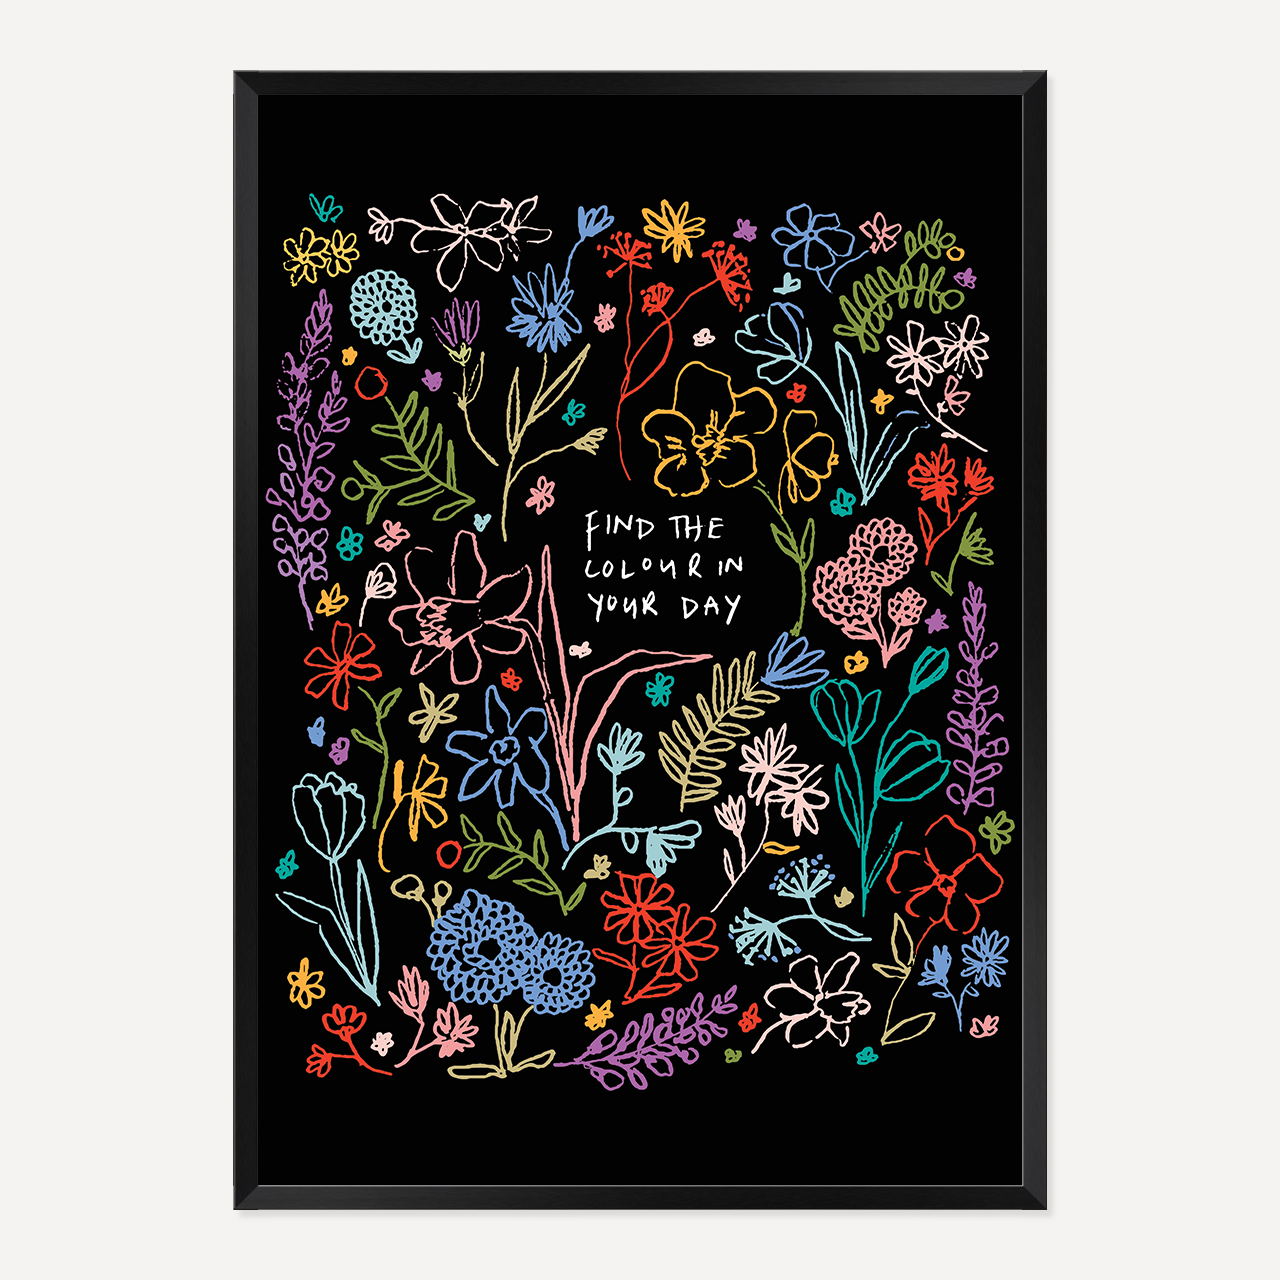 COLOUR IN YOUR DAY POSTER - BLACK